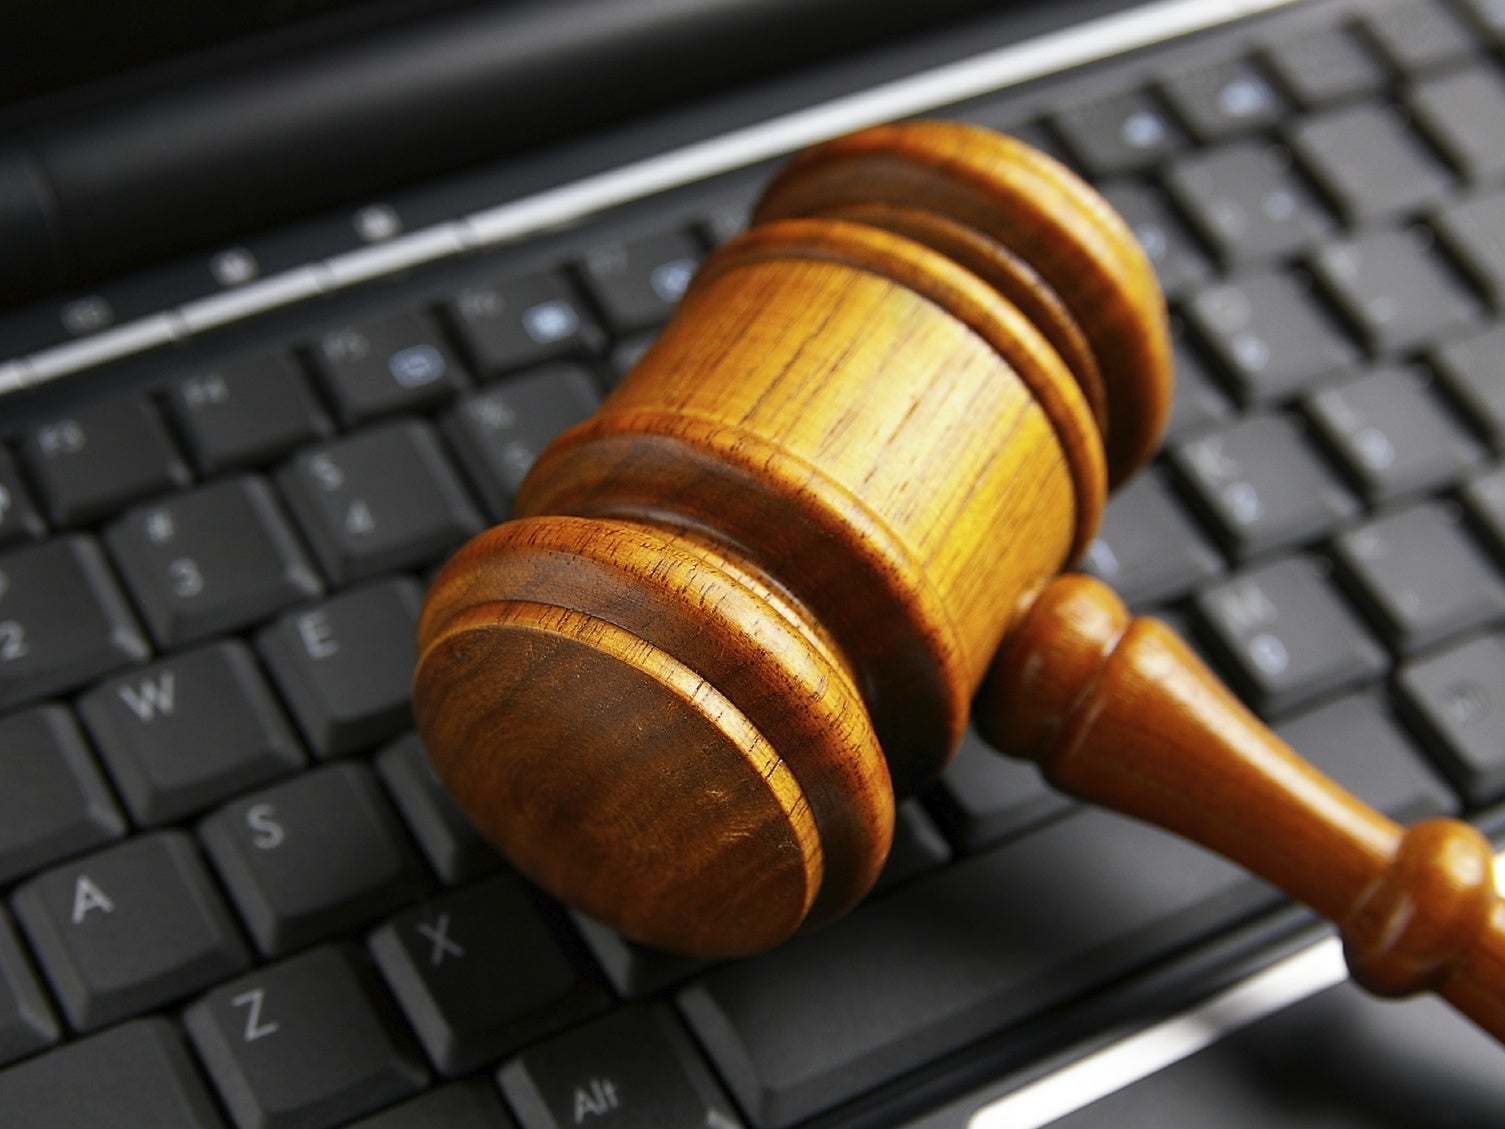 Defamation development: Comments on social media increase the scope of potential liability